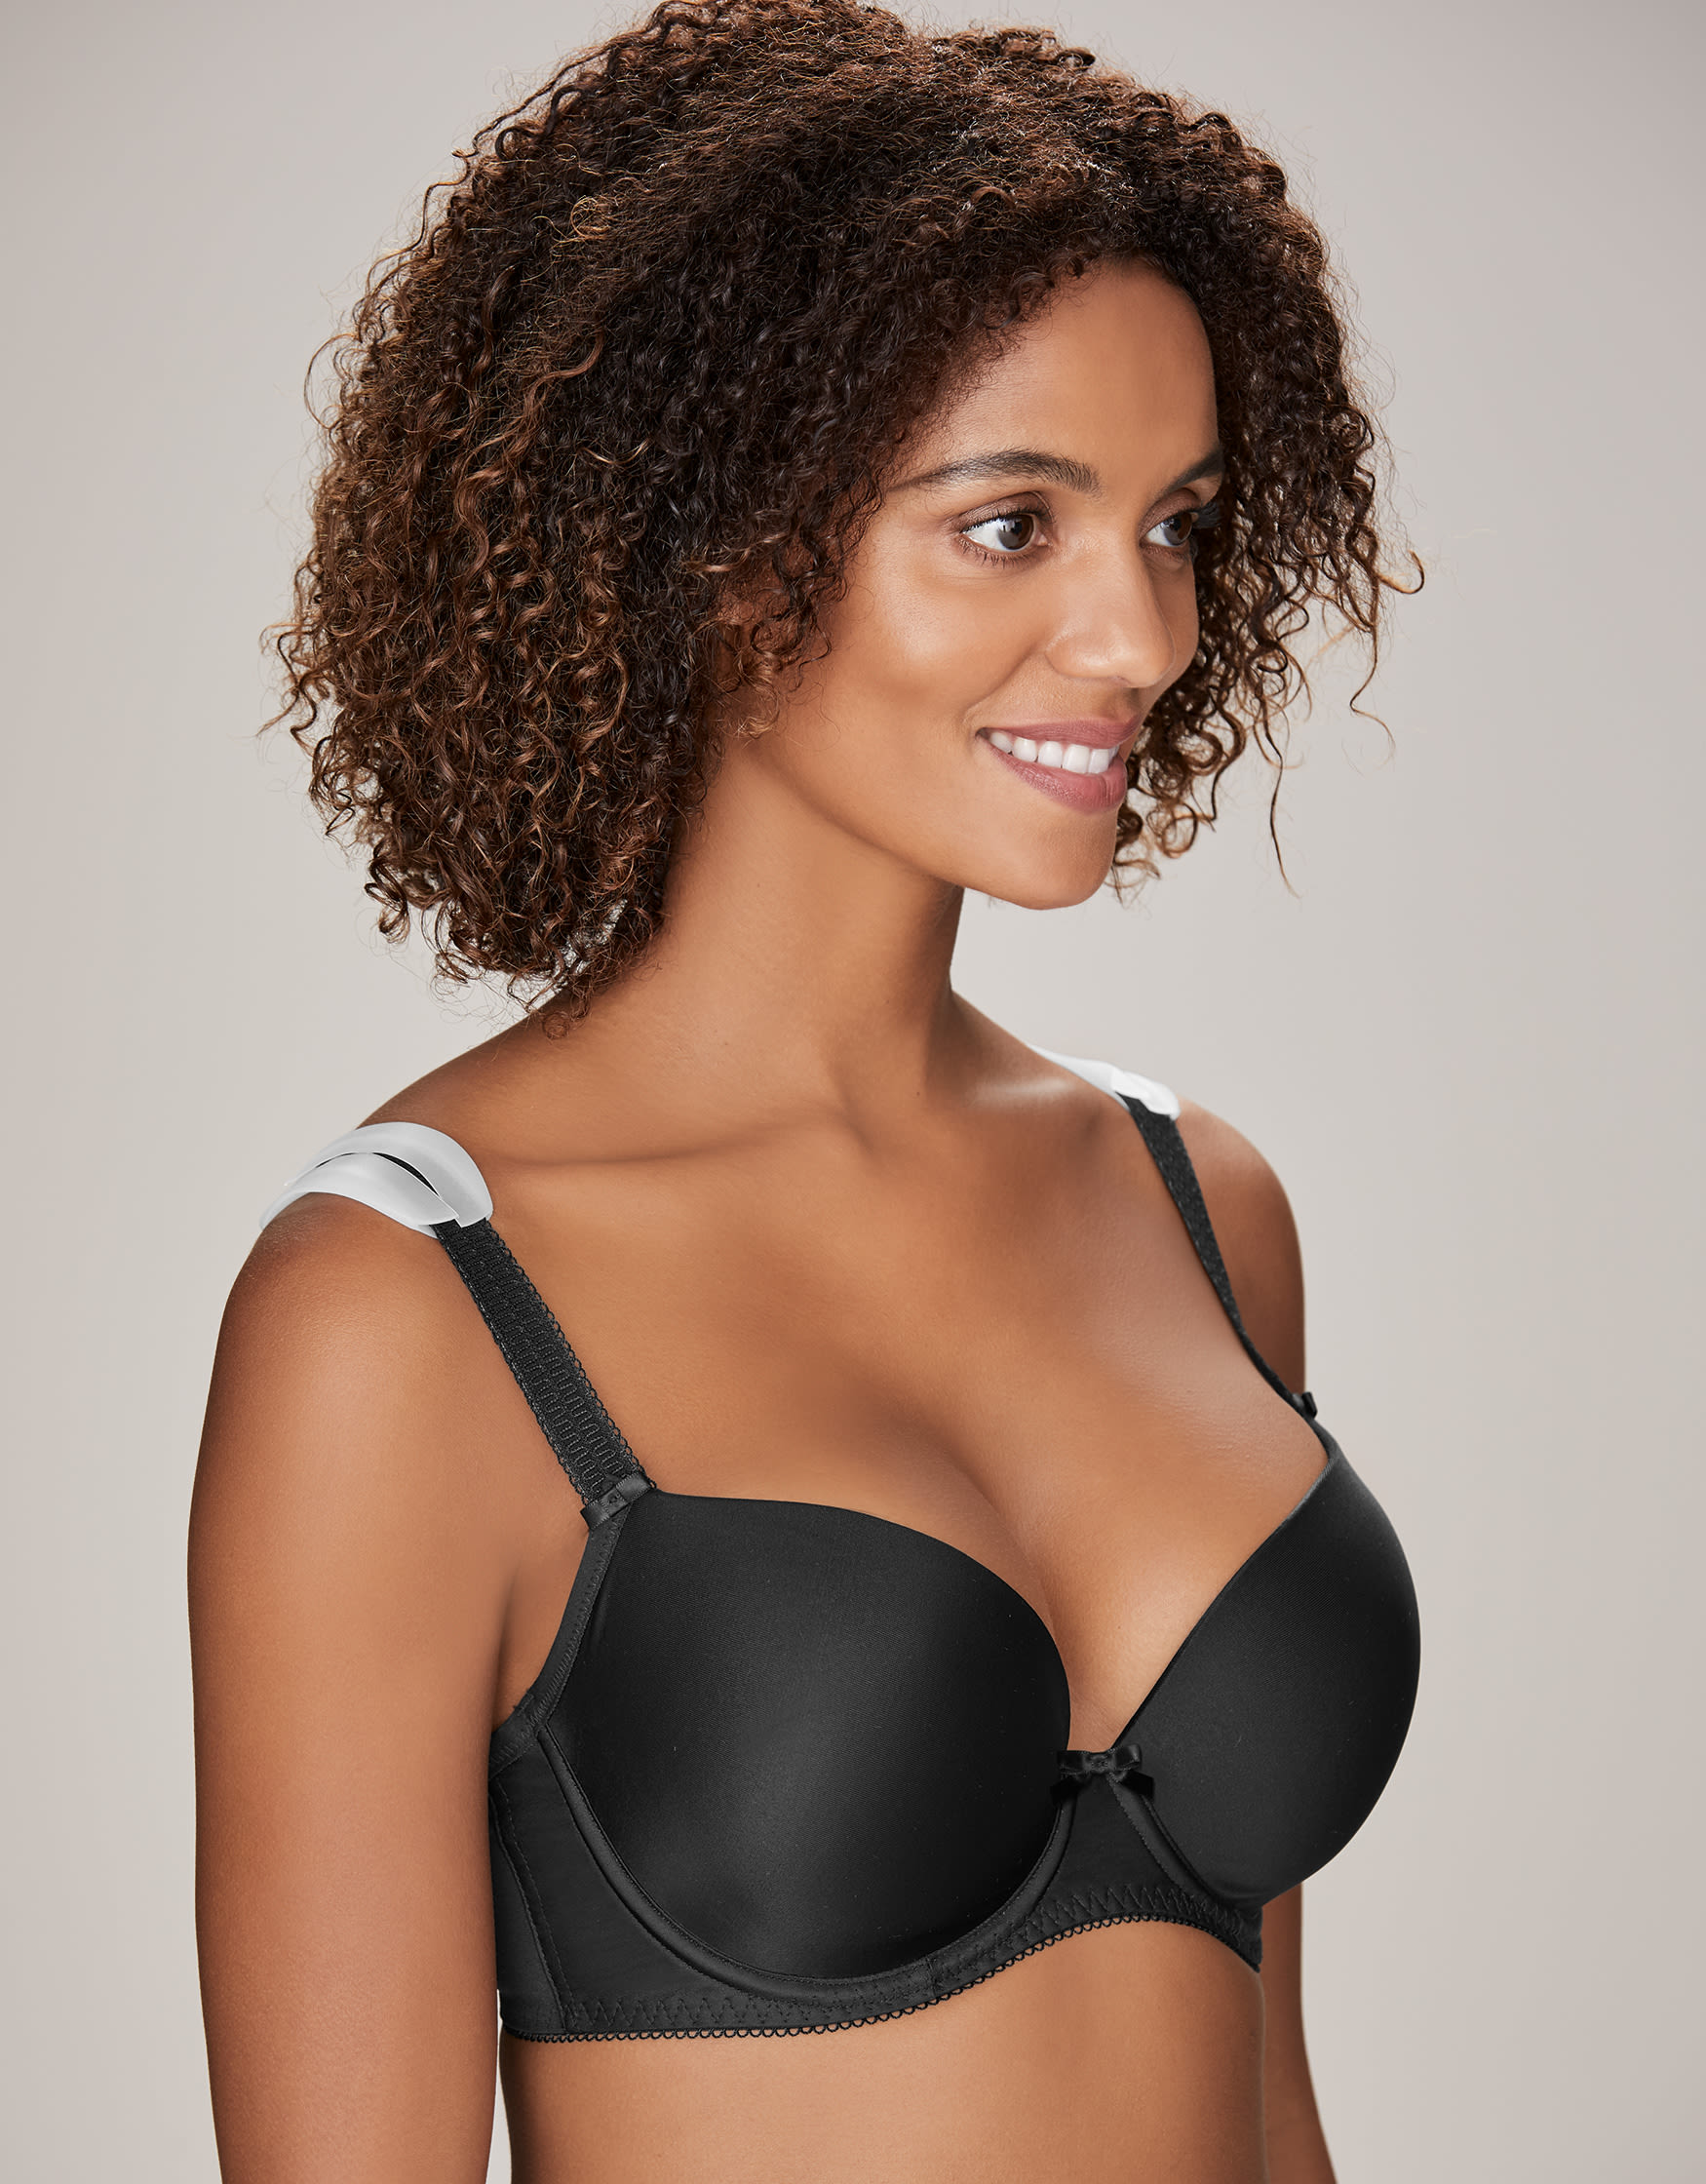 SILICONE BRA STRAP CUSHIONS PROTECT YOUR SHOULDERS BY PROVIDING RELIEF FROM  ANY BRA STRAPS PACK OF 1